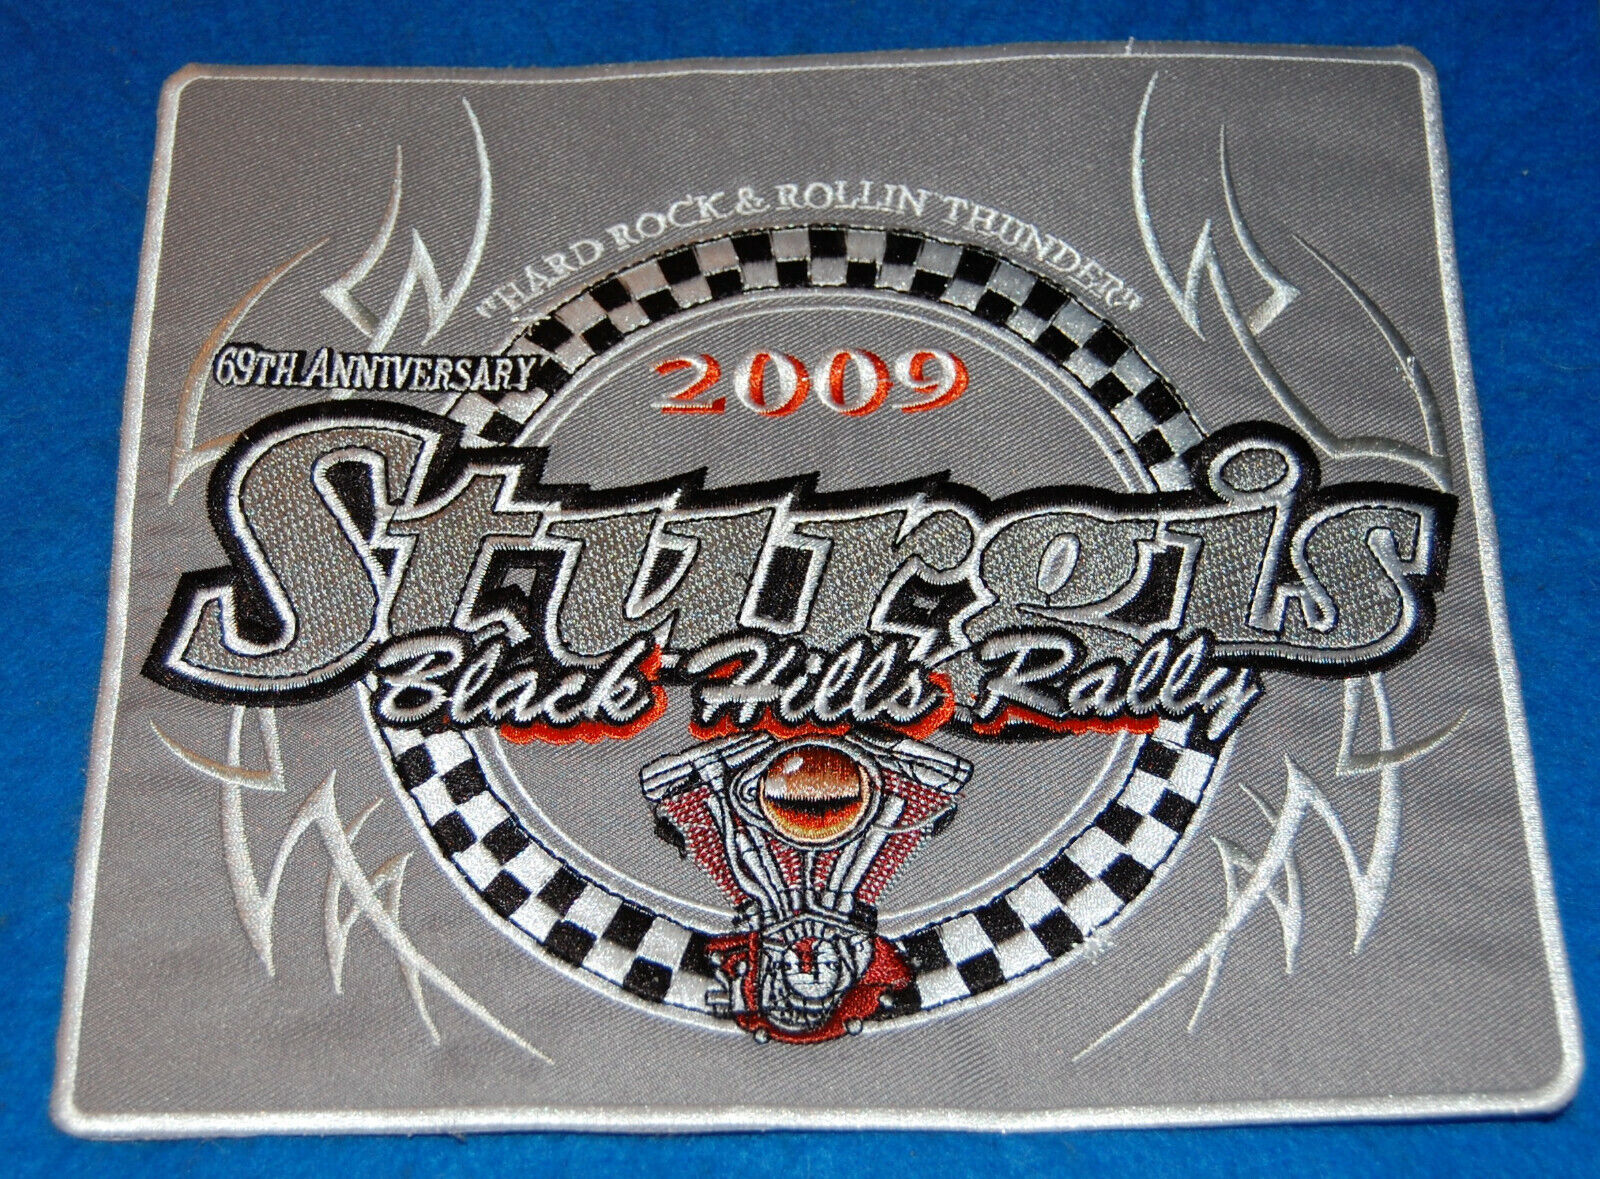 69th Anniversary 2009 Sturgis Black Hills Rally LARGE Embroidered Patch, New